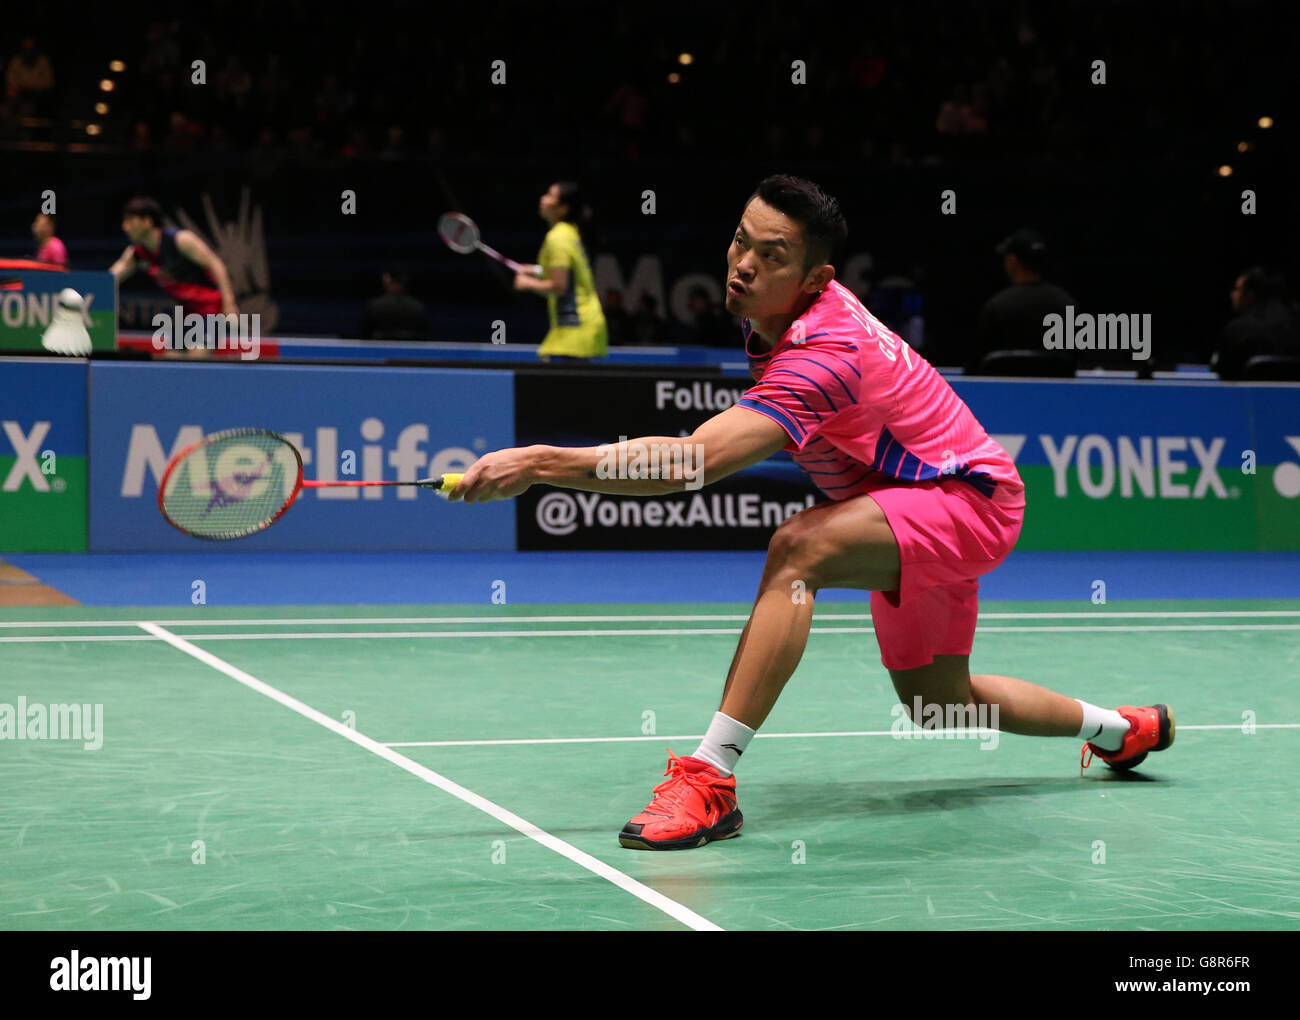 Chinas Dan Lin during his singles match on day two of the YONEX All England Open Badminton Championships at the Barclaycard Arena, Birmingham Stock Photo